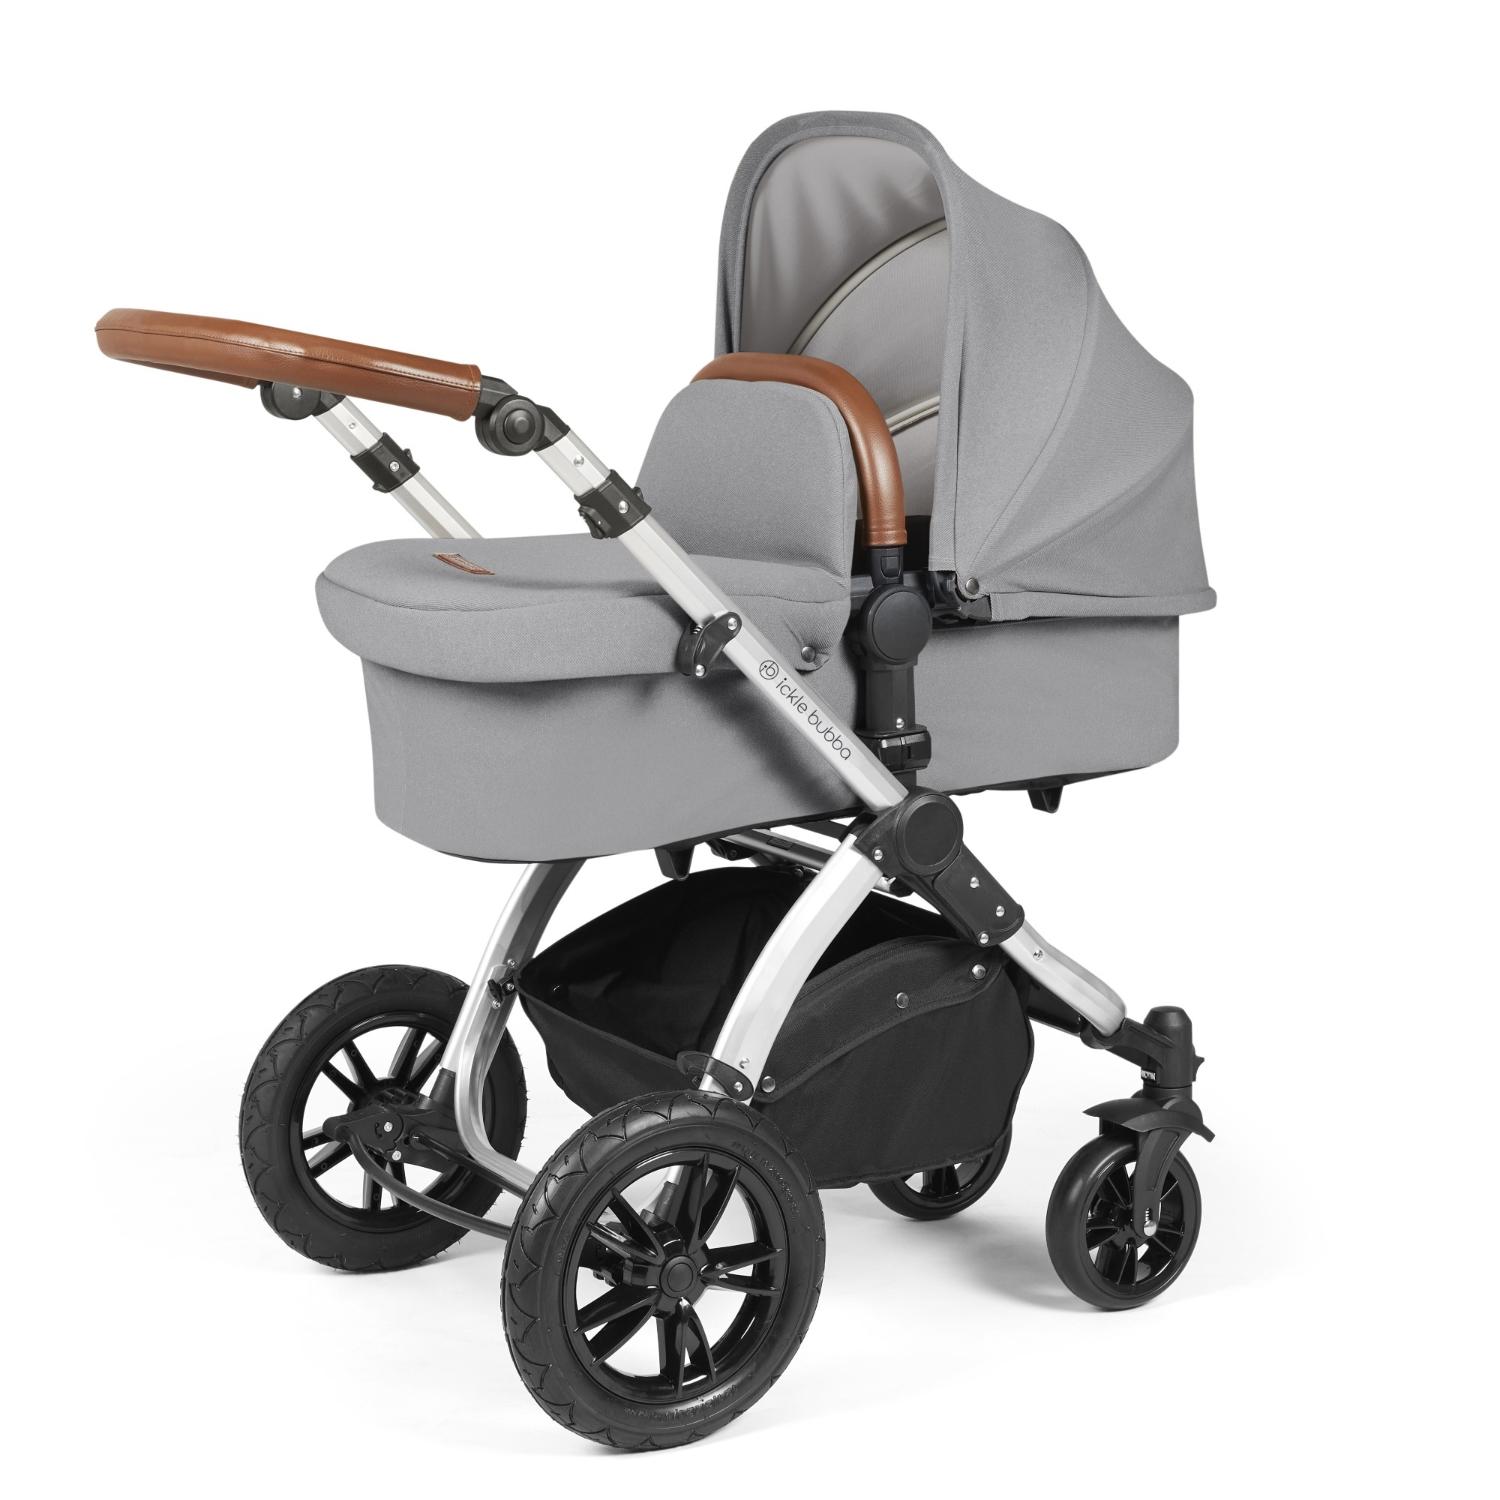 Ickle Bubba Stomp Luxe Pushchair with carrycot attached in Pearl Grey colour with silver chassis and tan handle